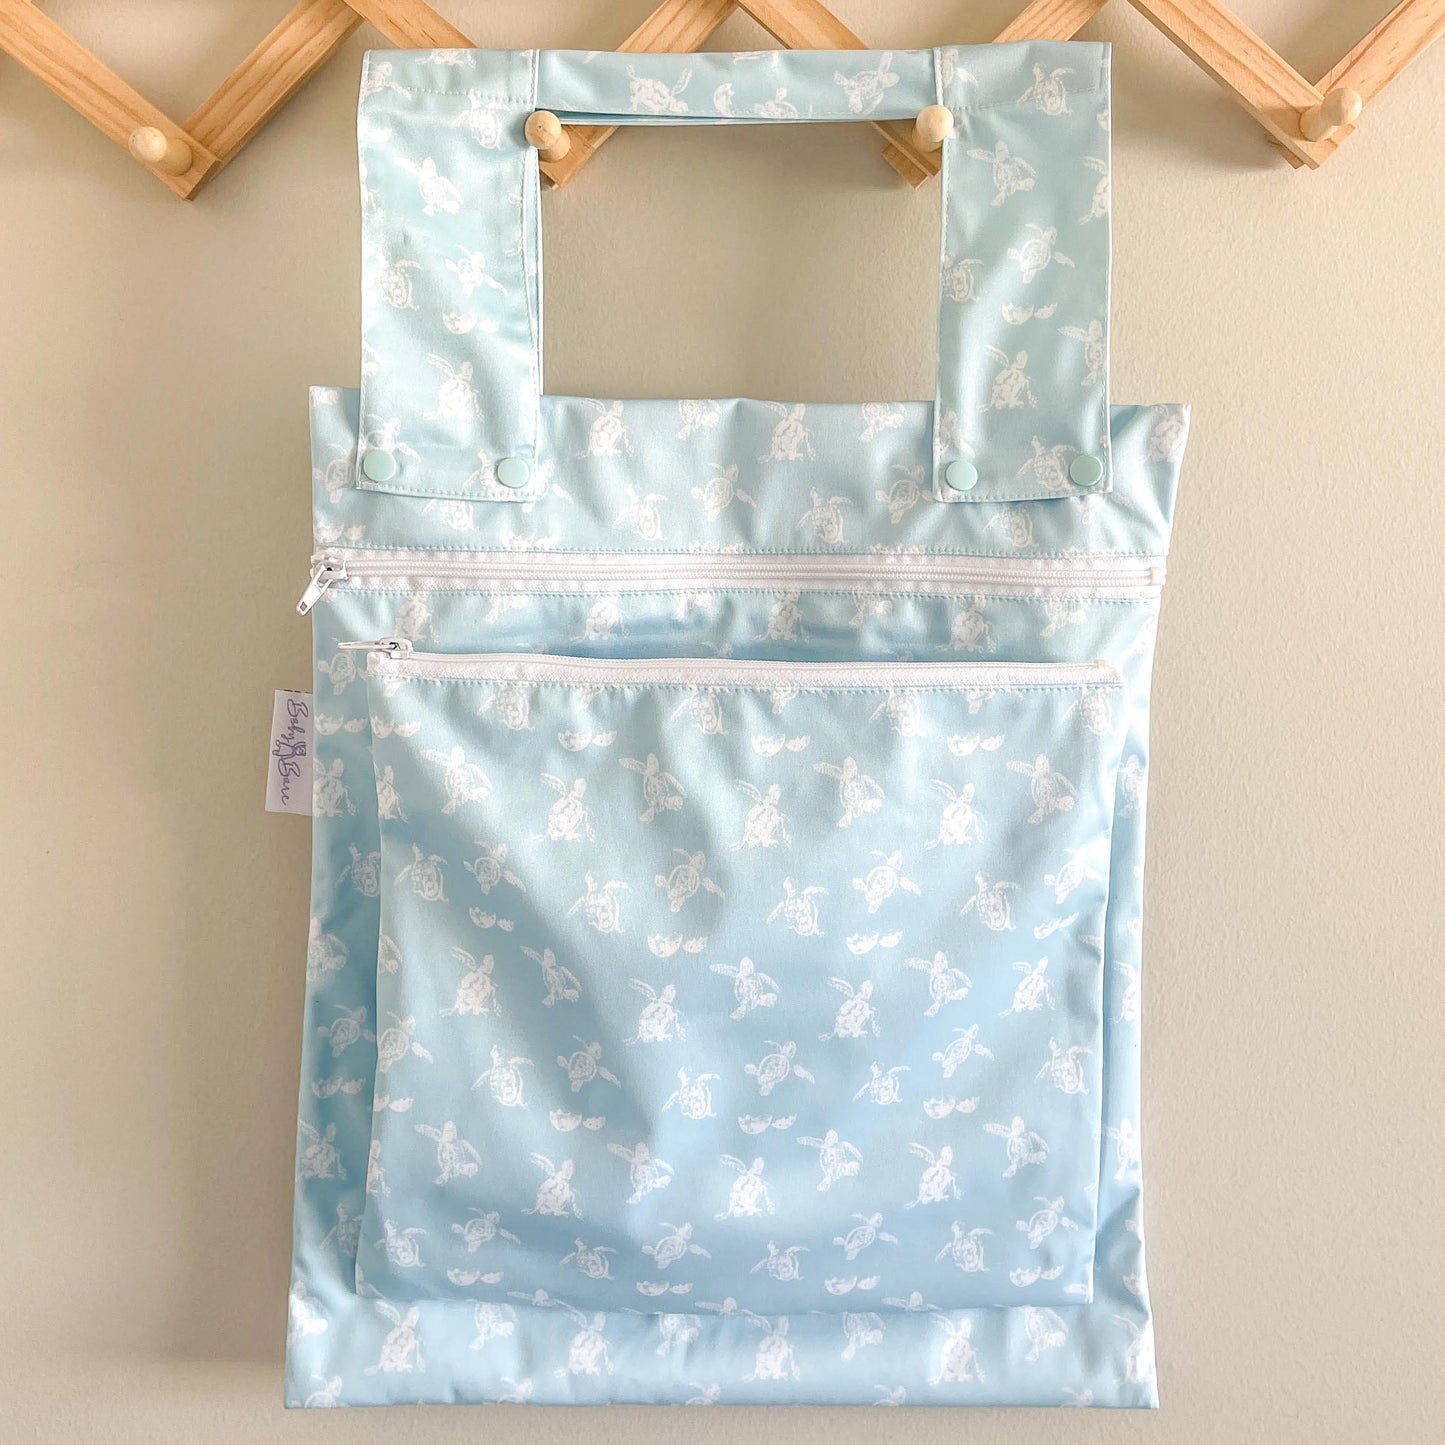 Wet Bag - Double - Nursery Classics Collection - Baby Bare Cloth Nappies